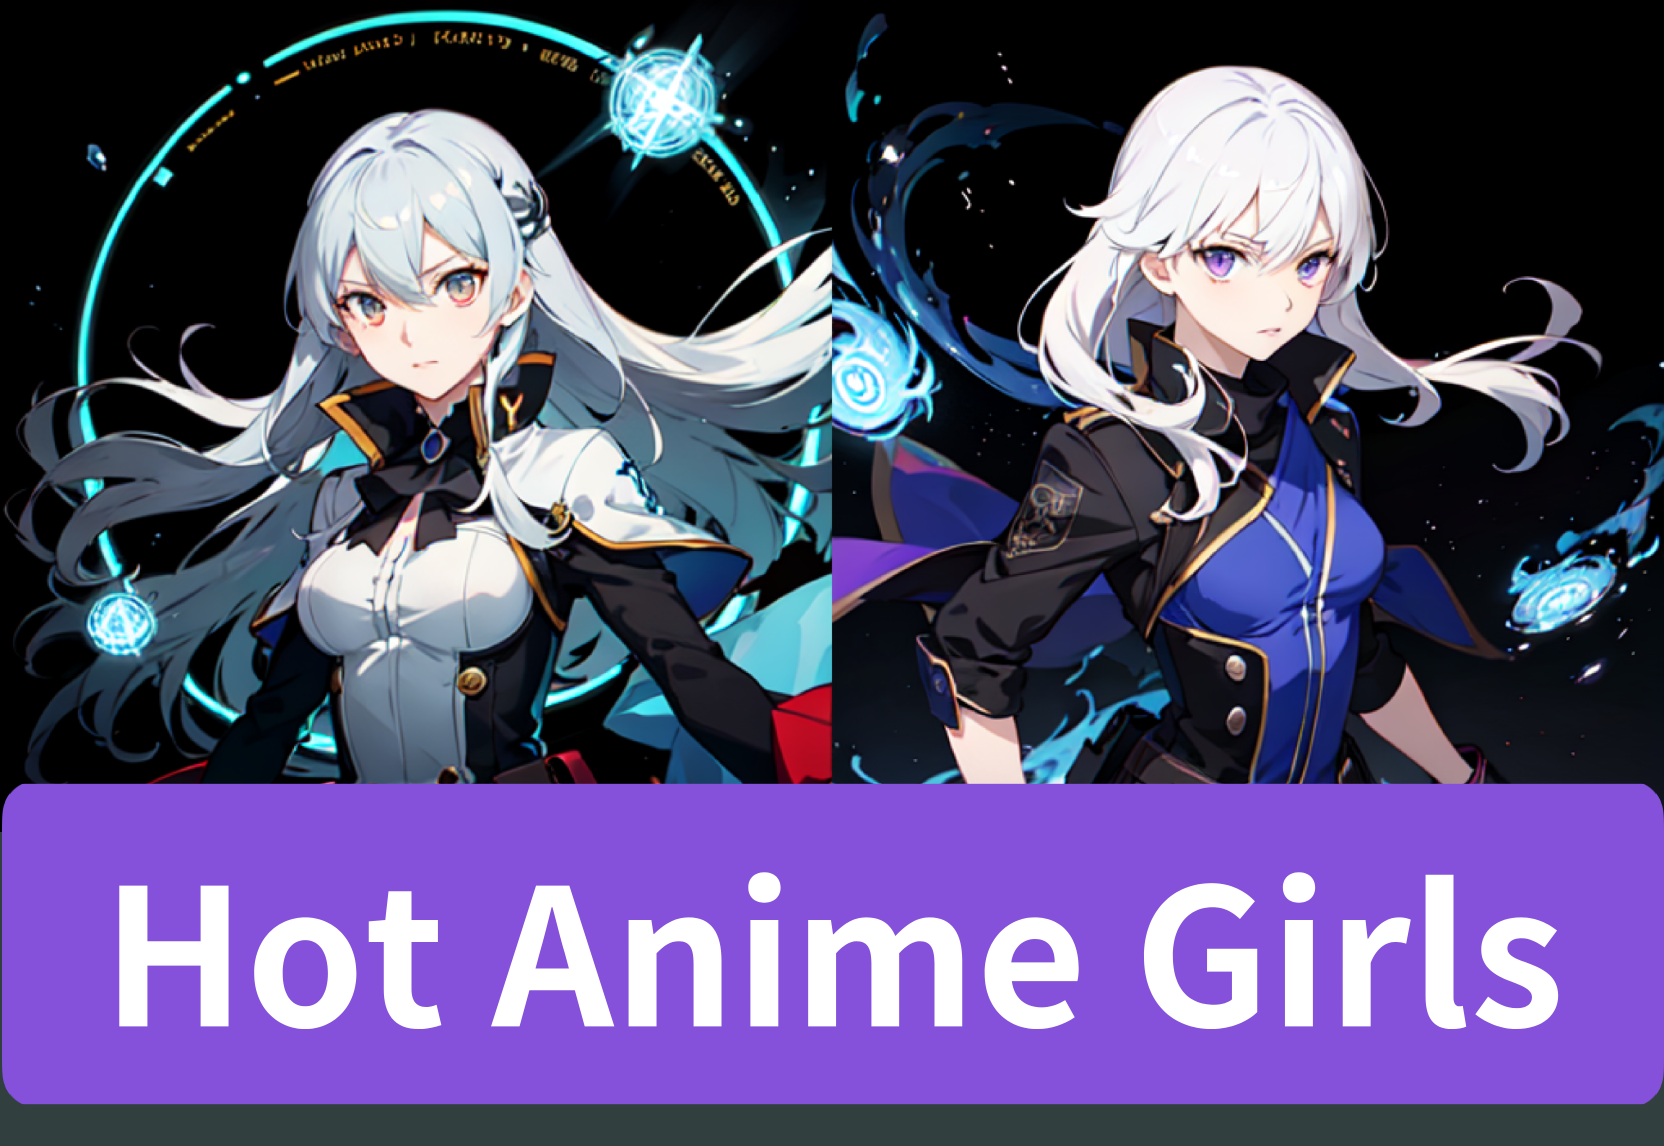 Hot Anime Girls: Develop AI Image Generator for Anime Girls’ Creations